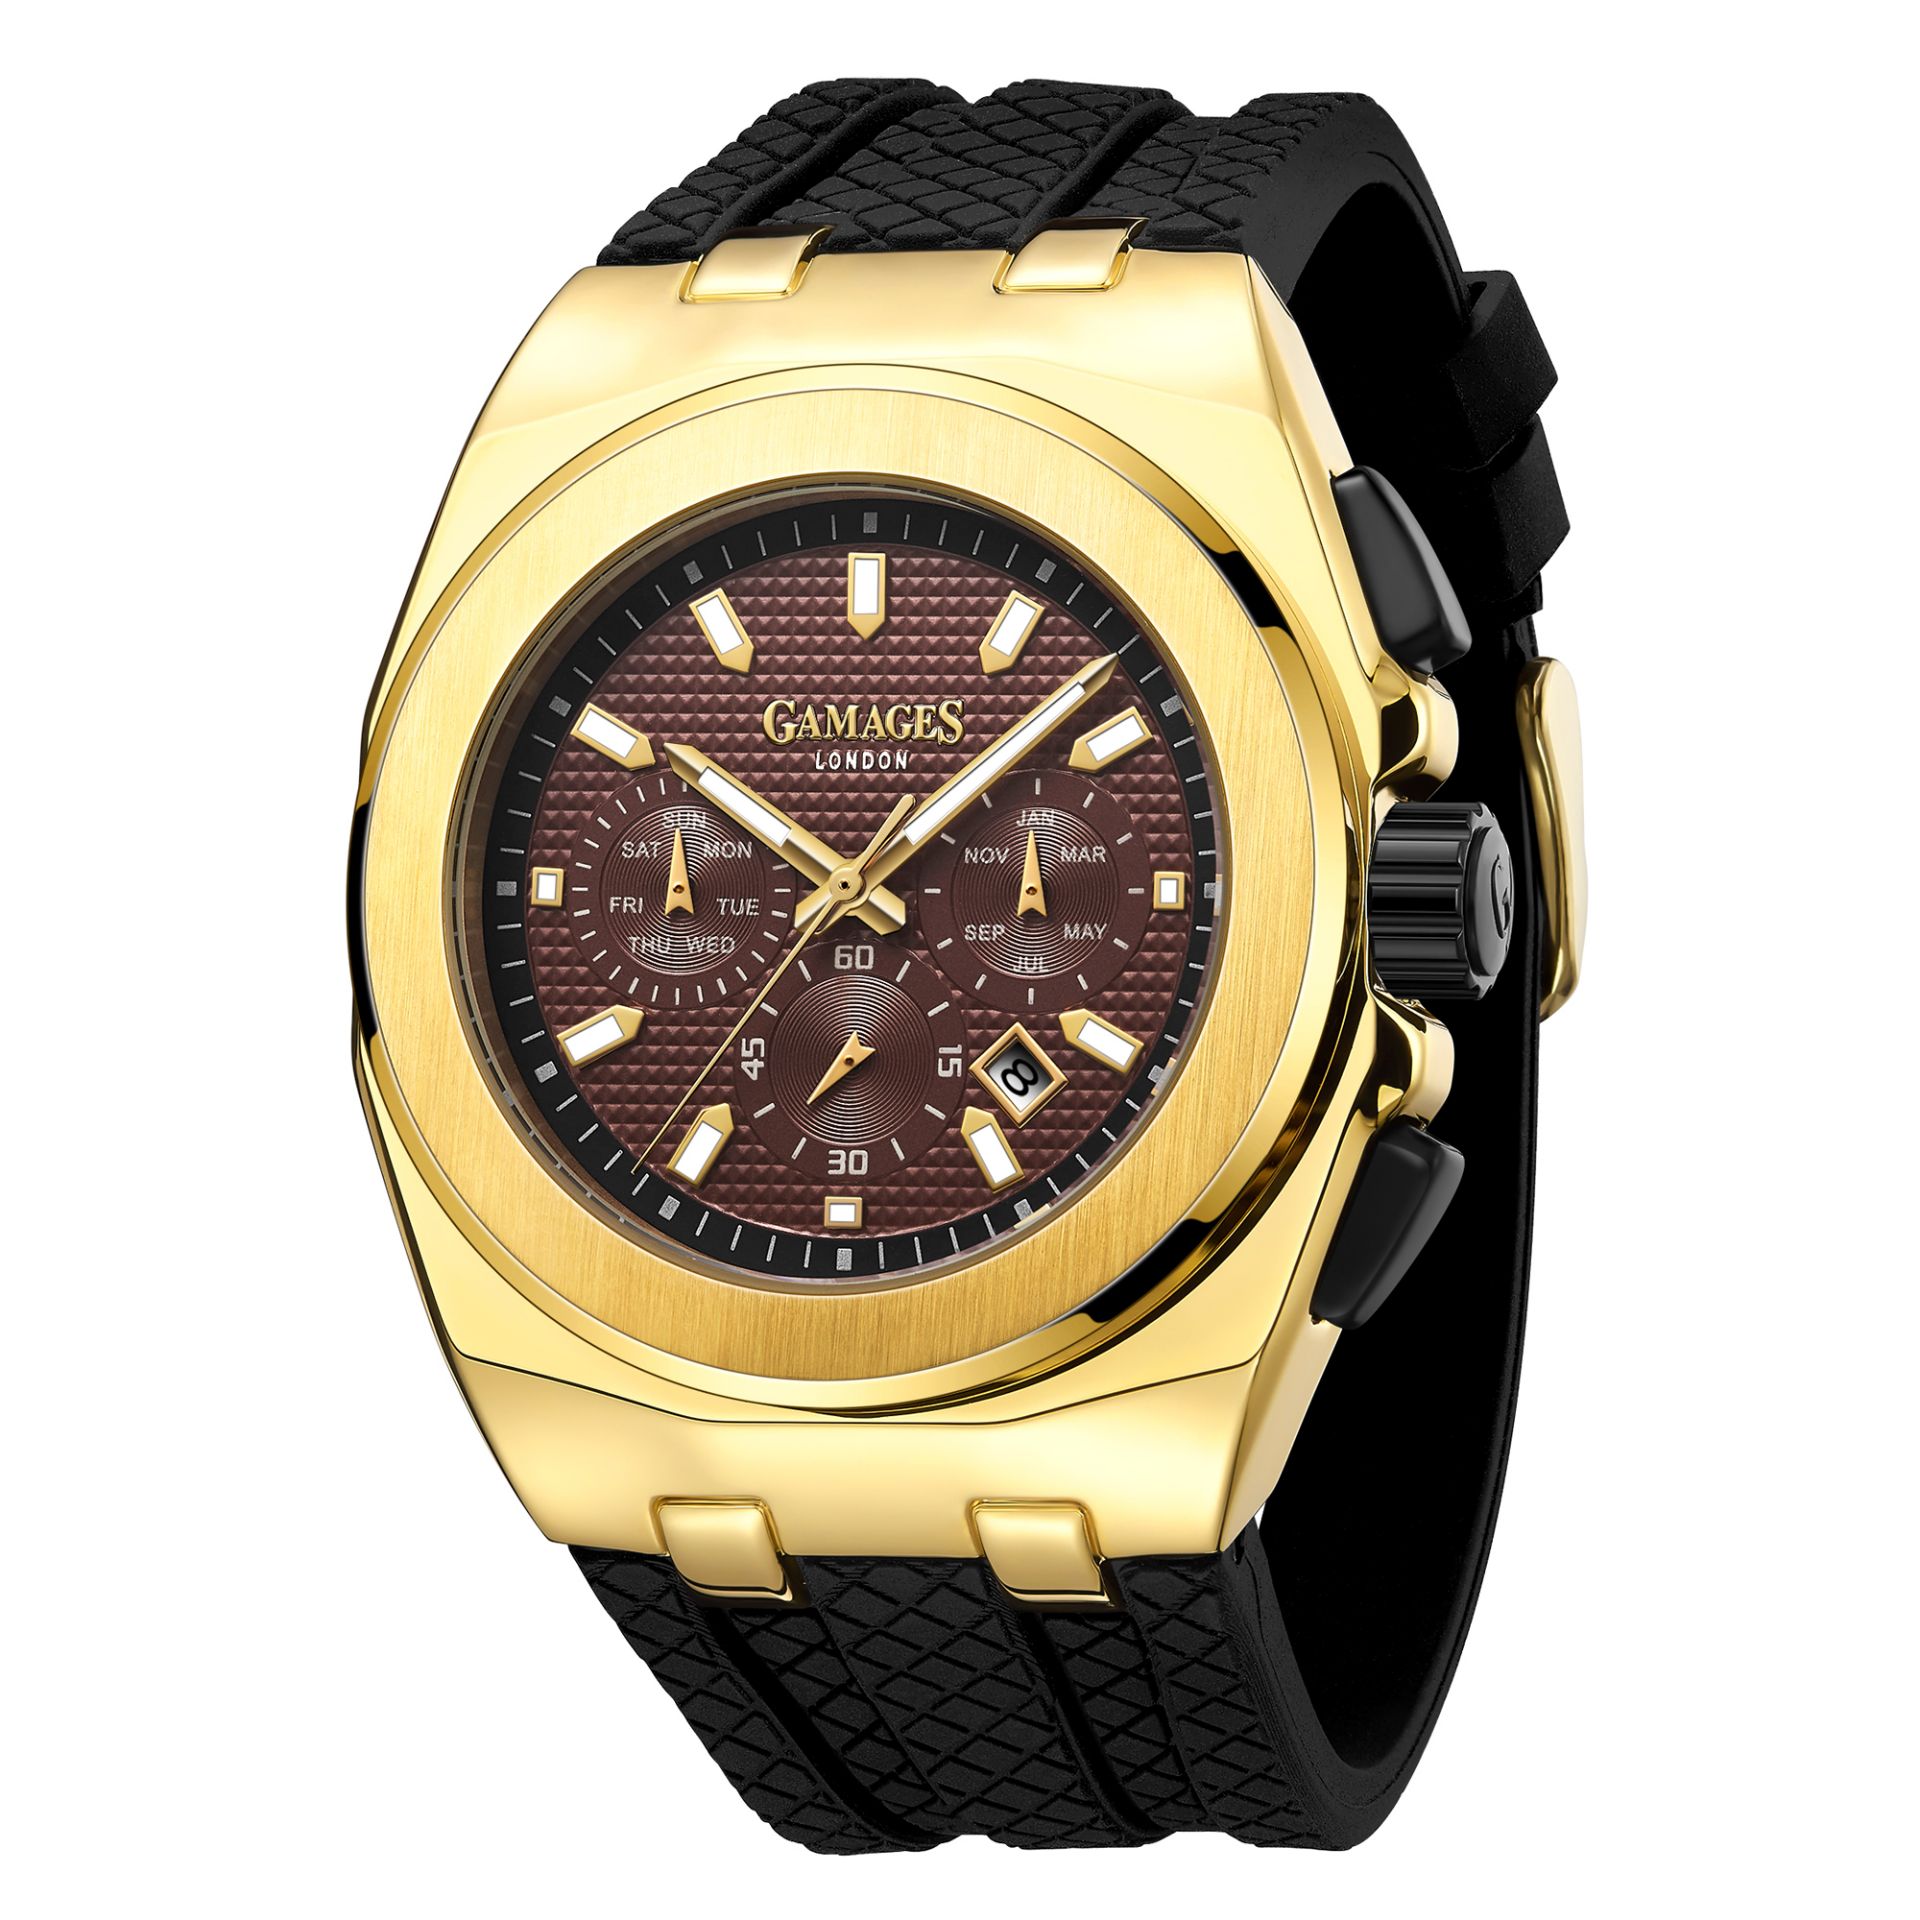 Limited Edition Hand Assembled Gamages Commander Automatic Gold – 5 Year Warranty & Free Delivery - Image 4 of 6